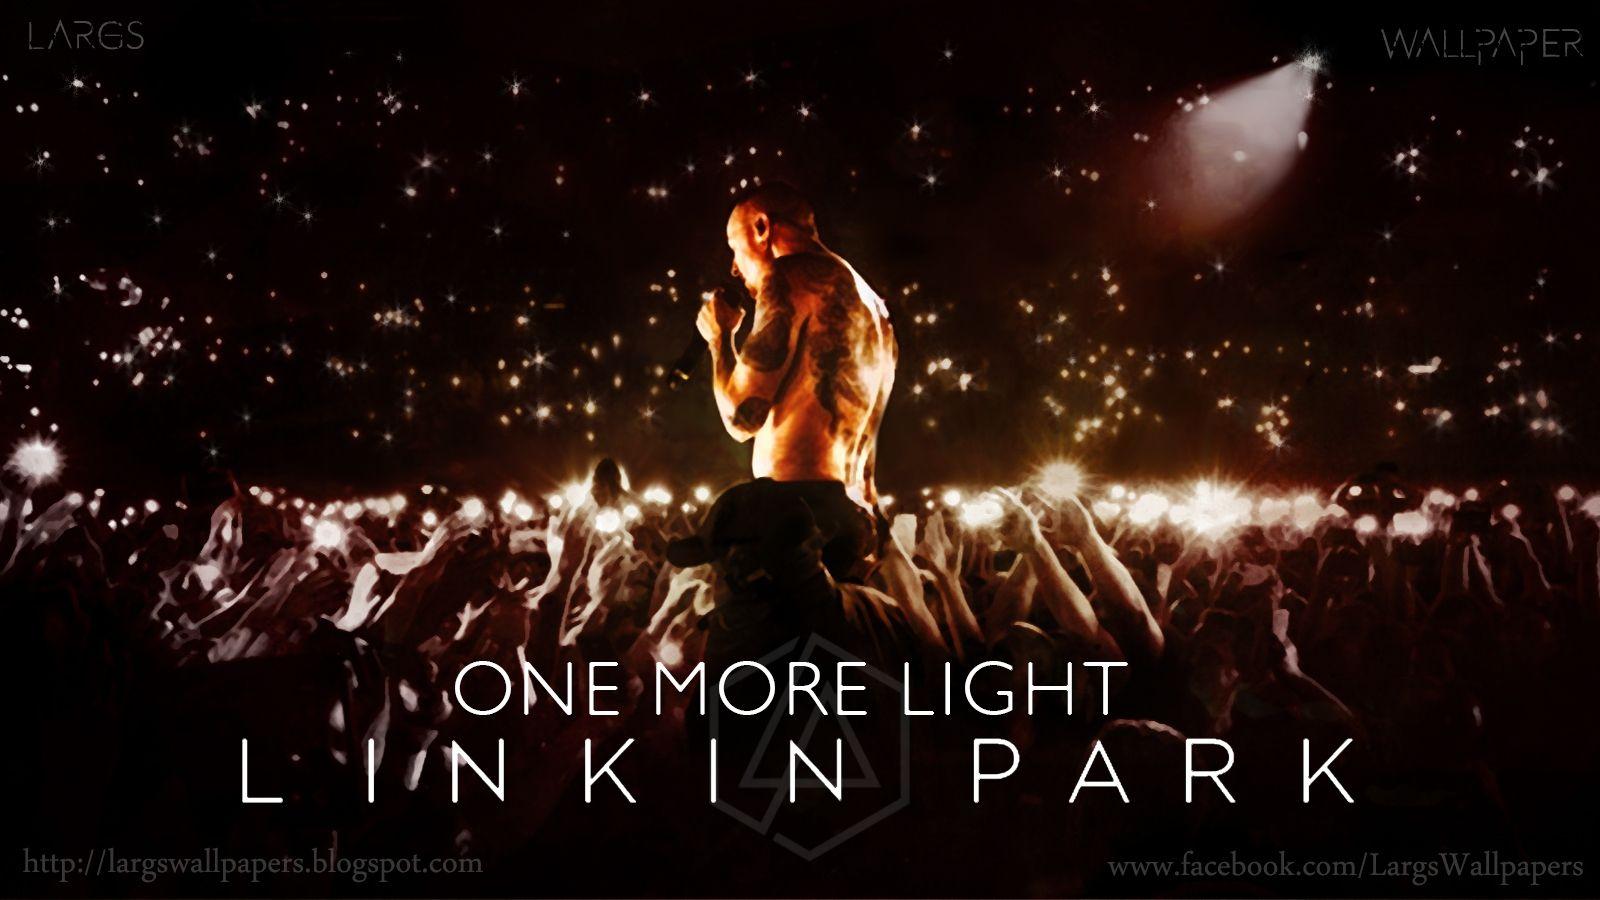 One More Light Linkin Park Wallpapers - Wallpaper Cave